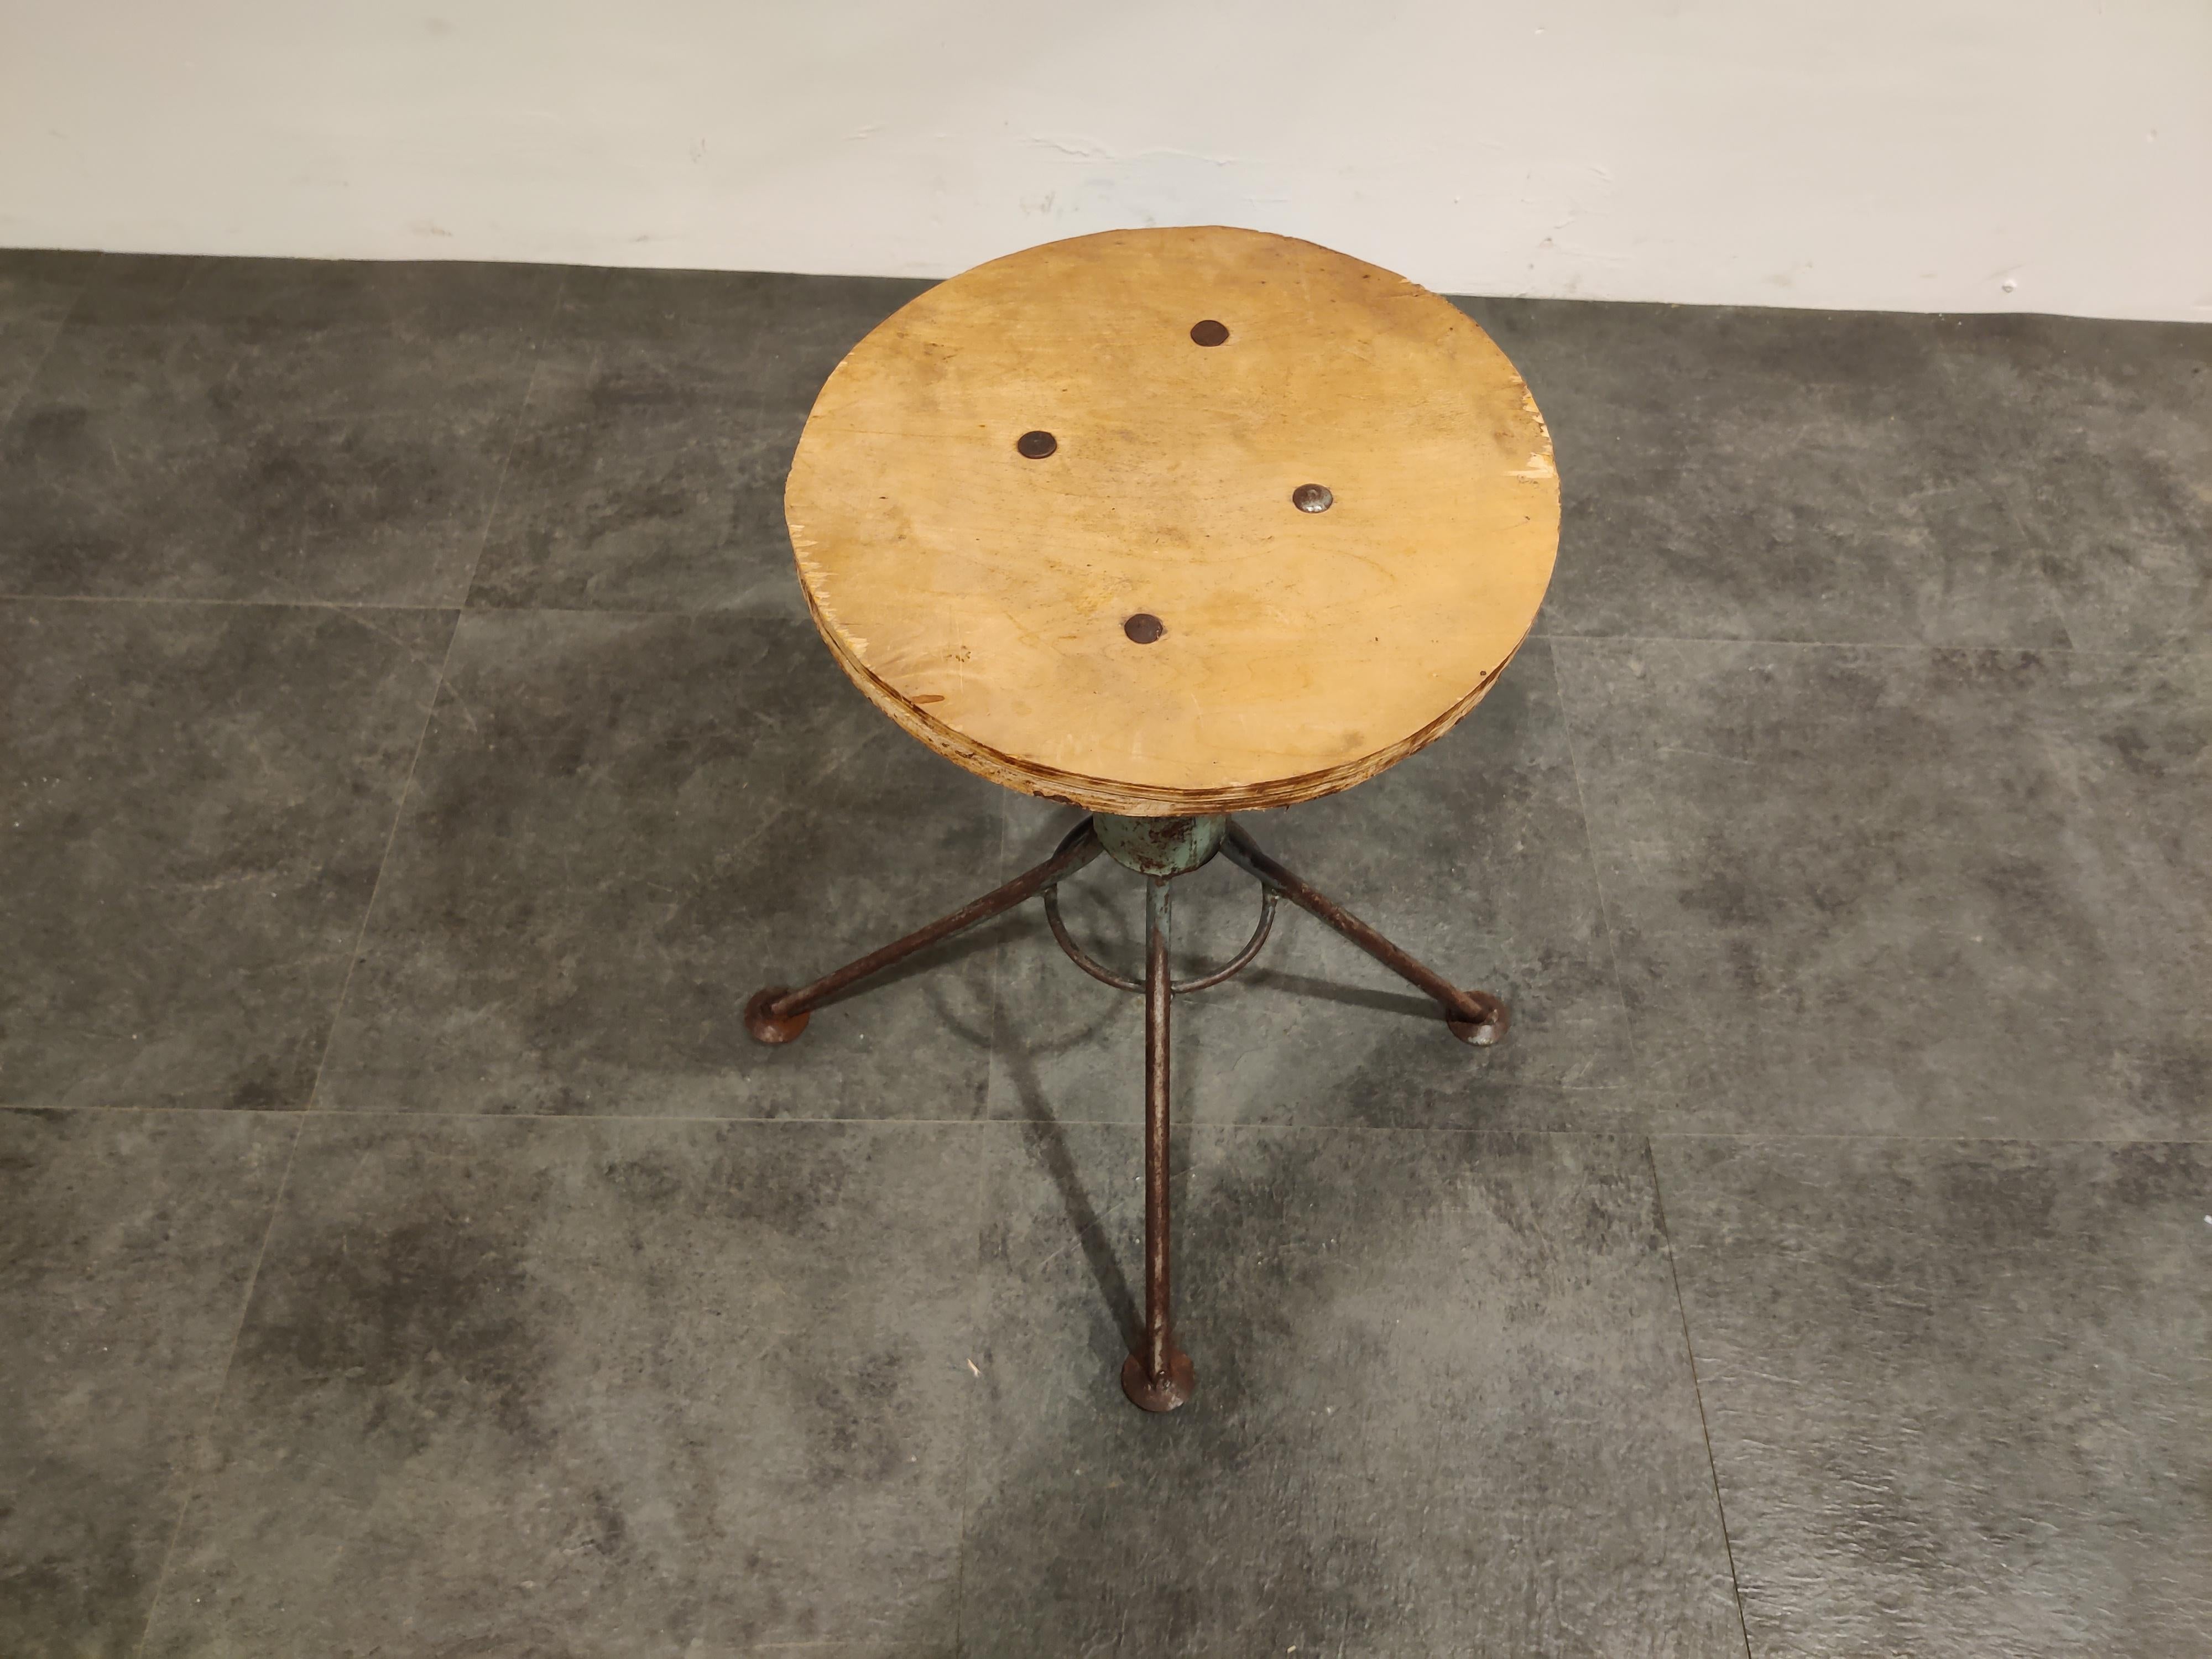 Great looking vintage factory stool with a plywood seat.

The seat height is adjustable by turning the seat. 

Good used condition,

1950s, Latvia

Dimensions:
Max height 54cm/21.25